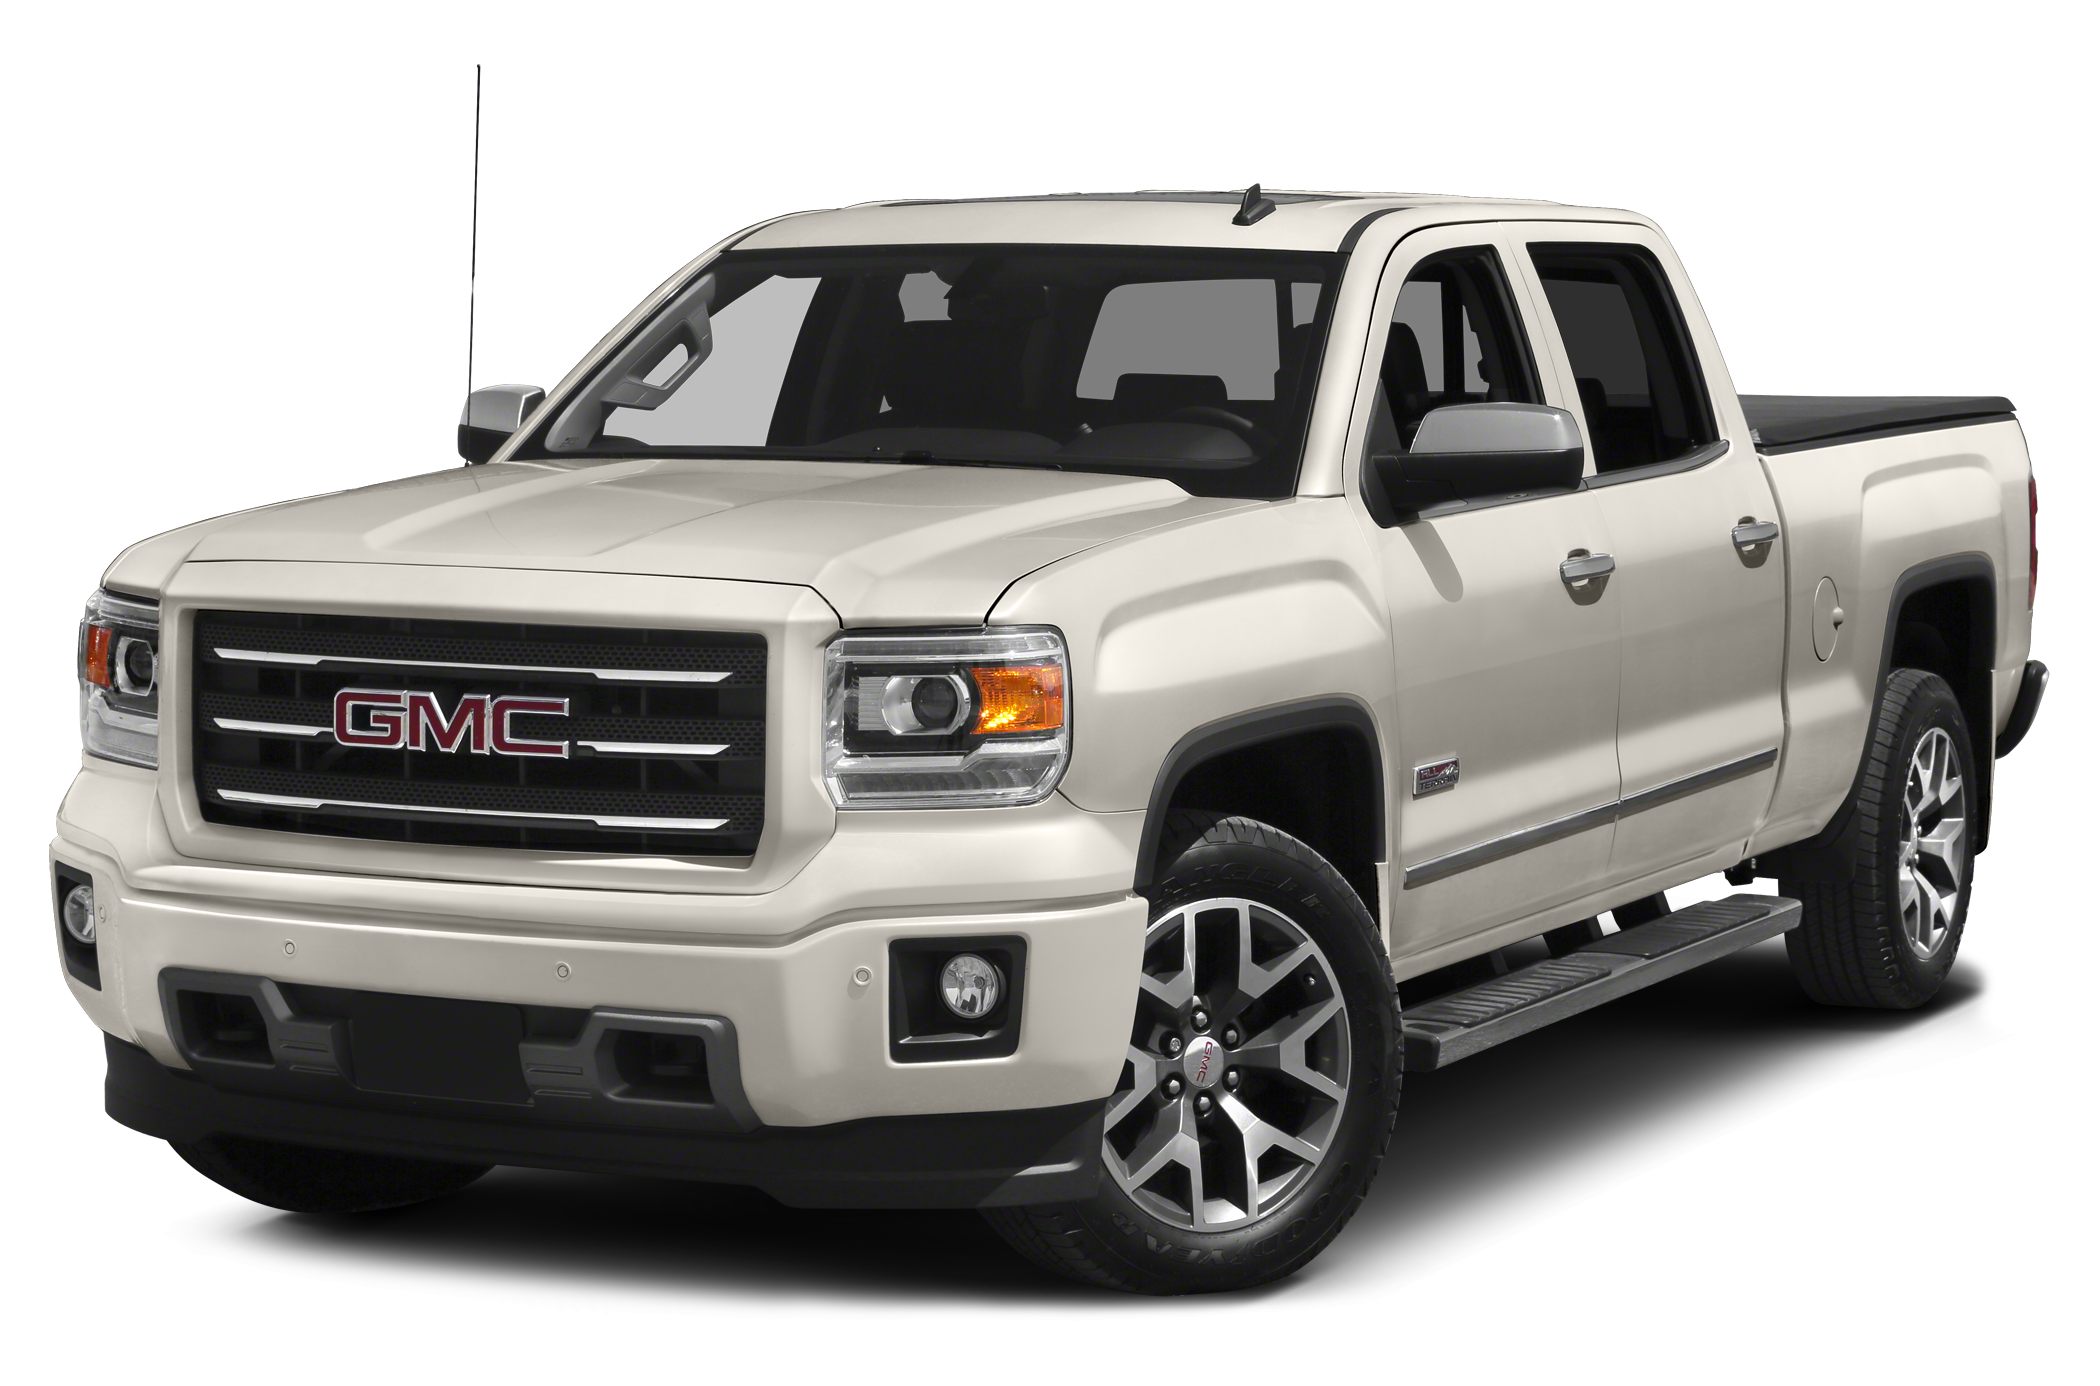 2015 Gmc Sierra 1500 Slt 4x2 Crew Cab 5 75 Ft Box 143 5 In Wb Pictures